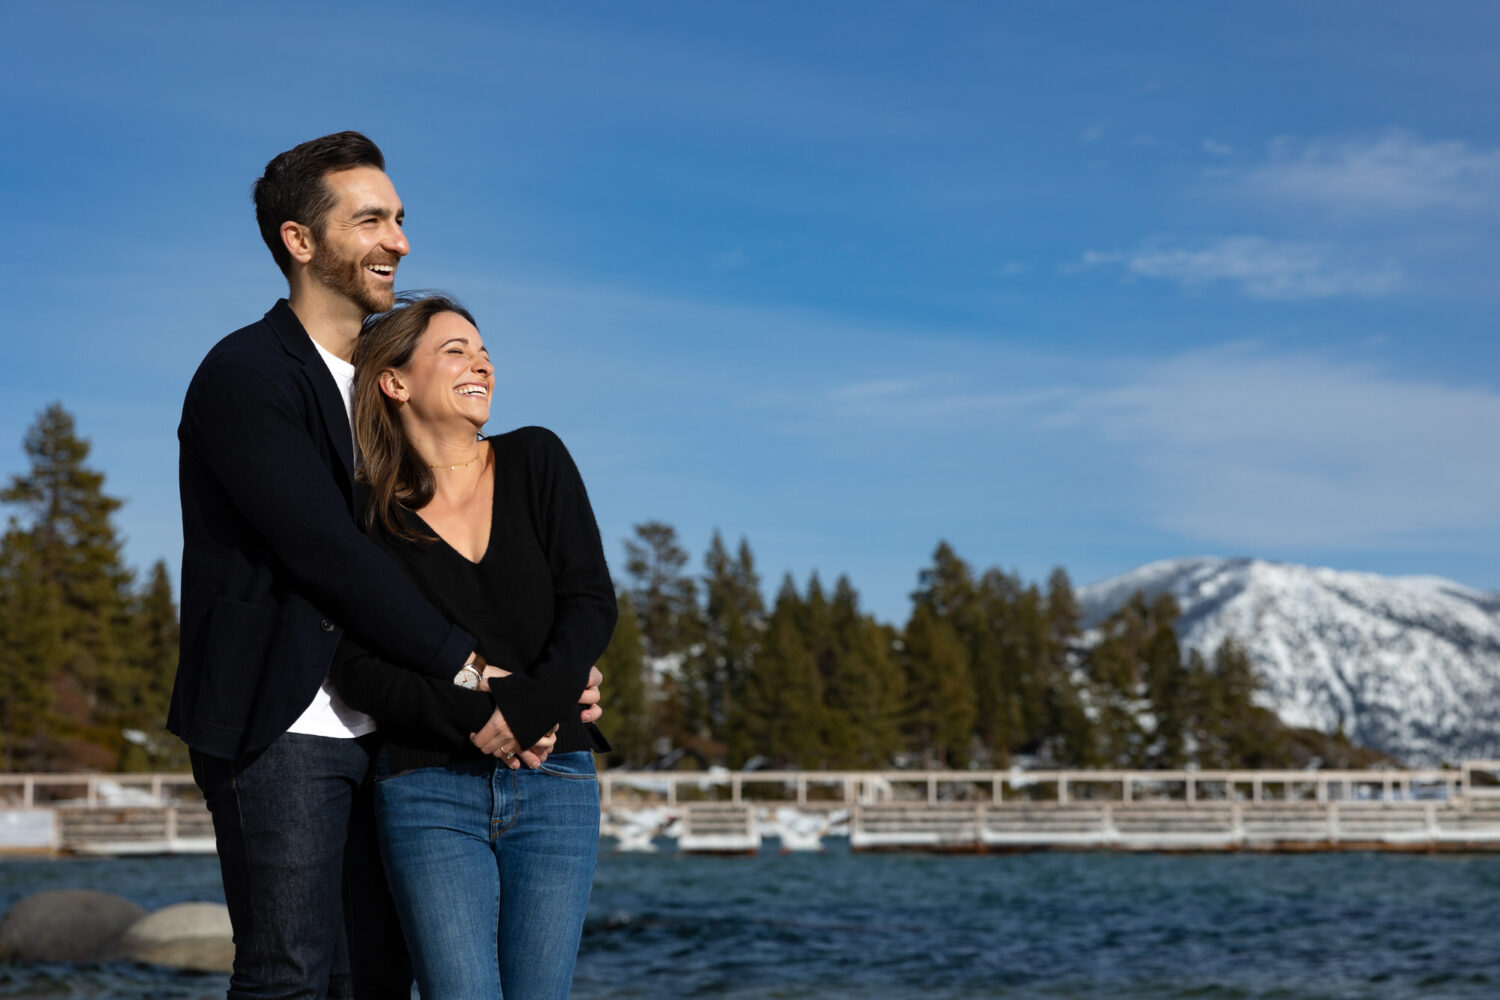 Lake Tahoe engagement session in winter with snowy mountains and blue sky and the background. 